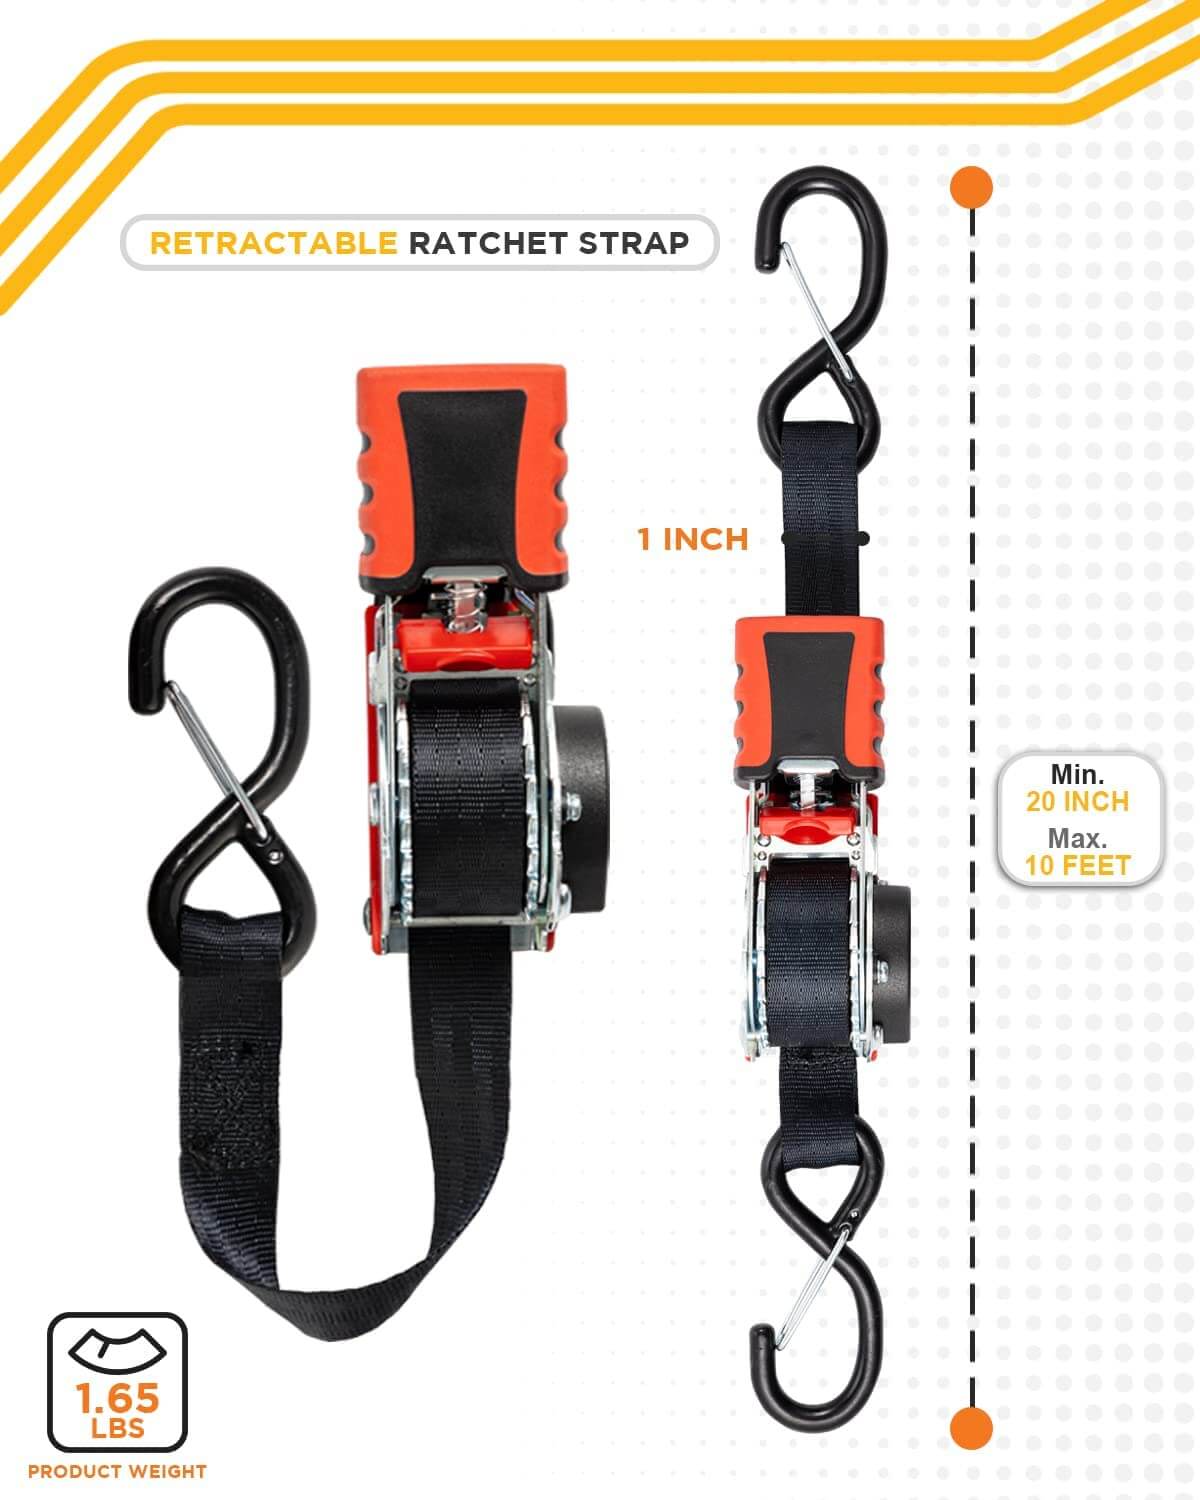 Strapinno Retractable Ratchet Straps 1 in x 10 ft, Secure Tie-Downs ...